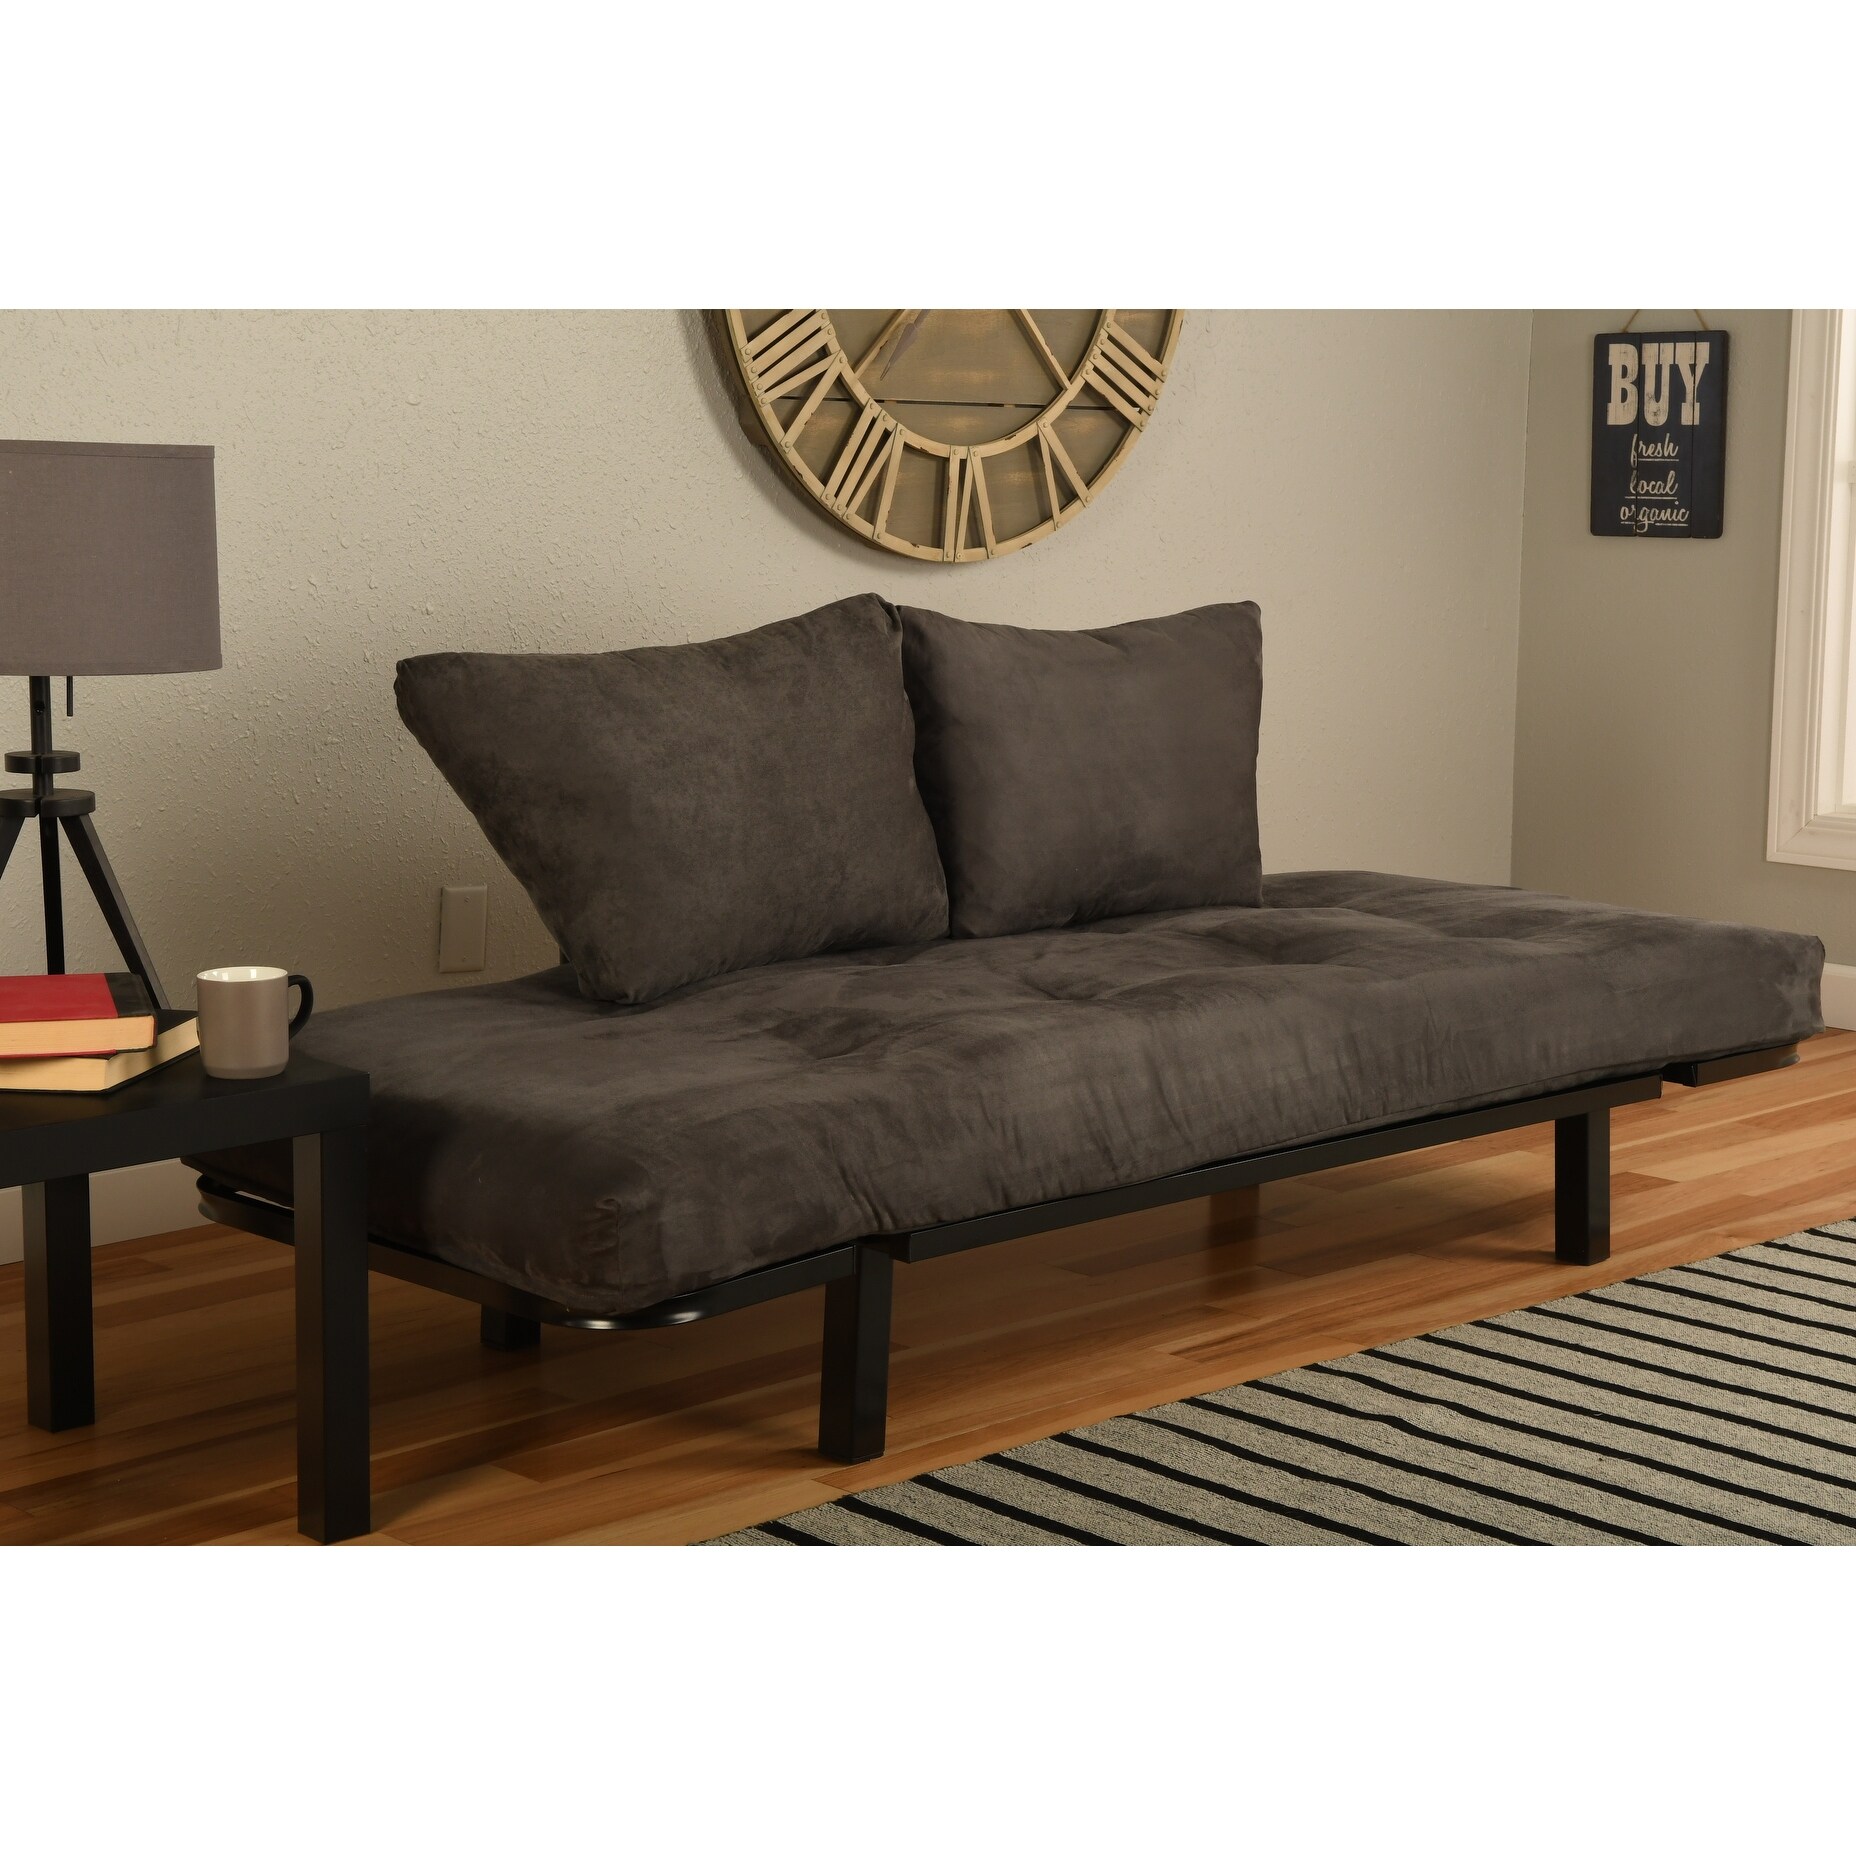 & Den Daybed with Suede Grey Mattress - On Sale - -